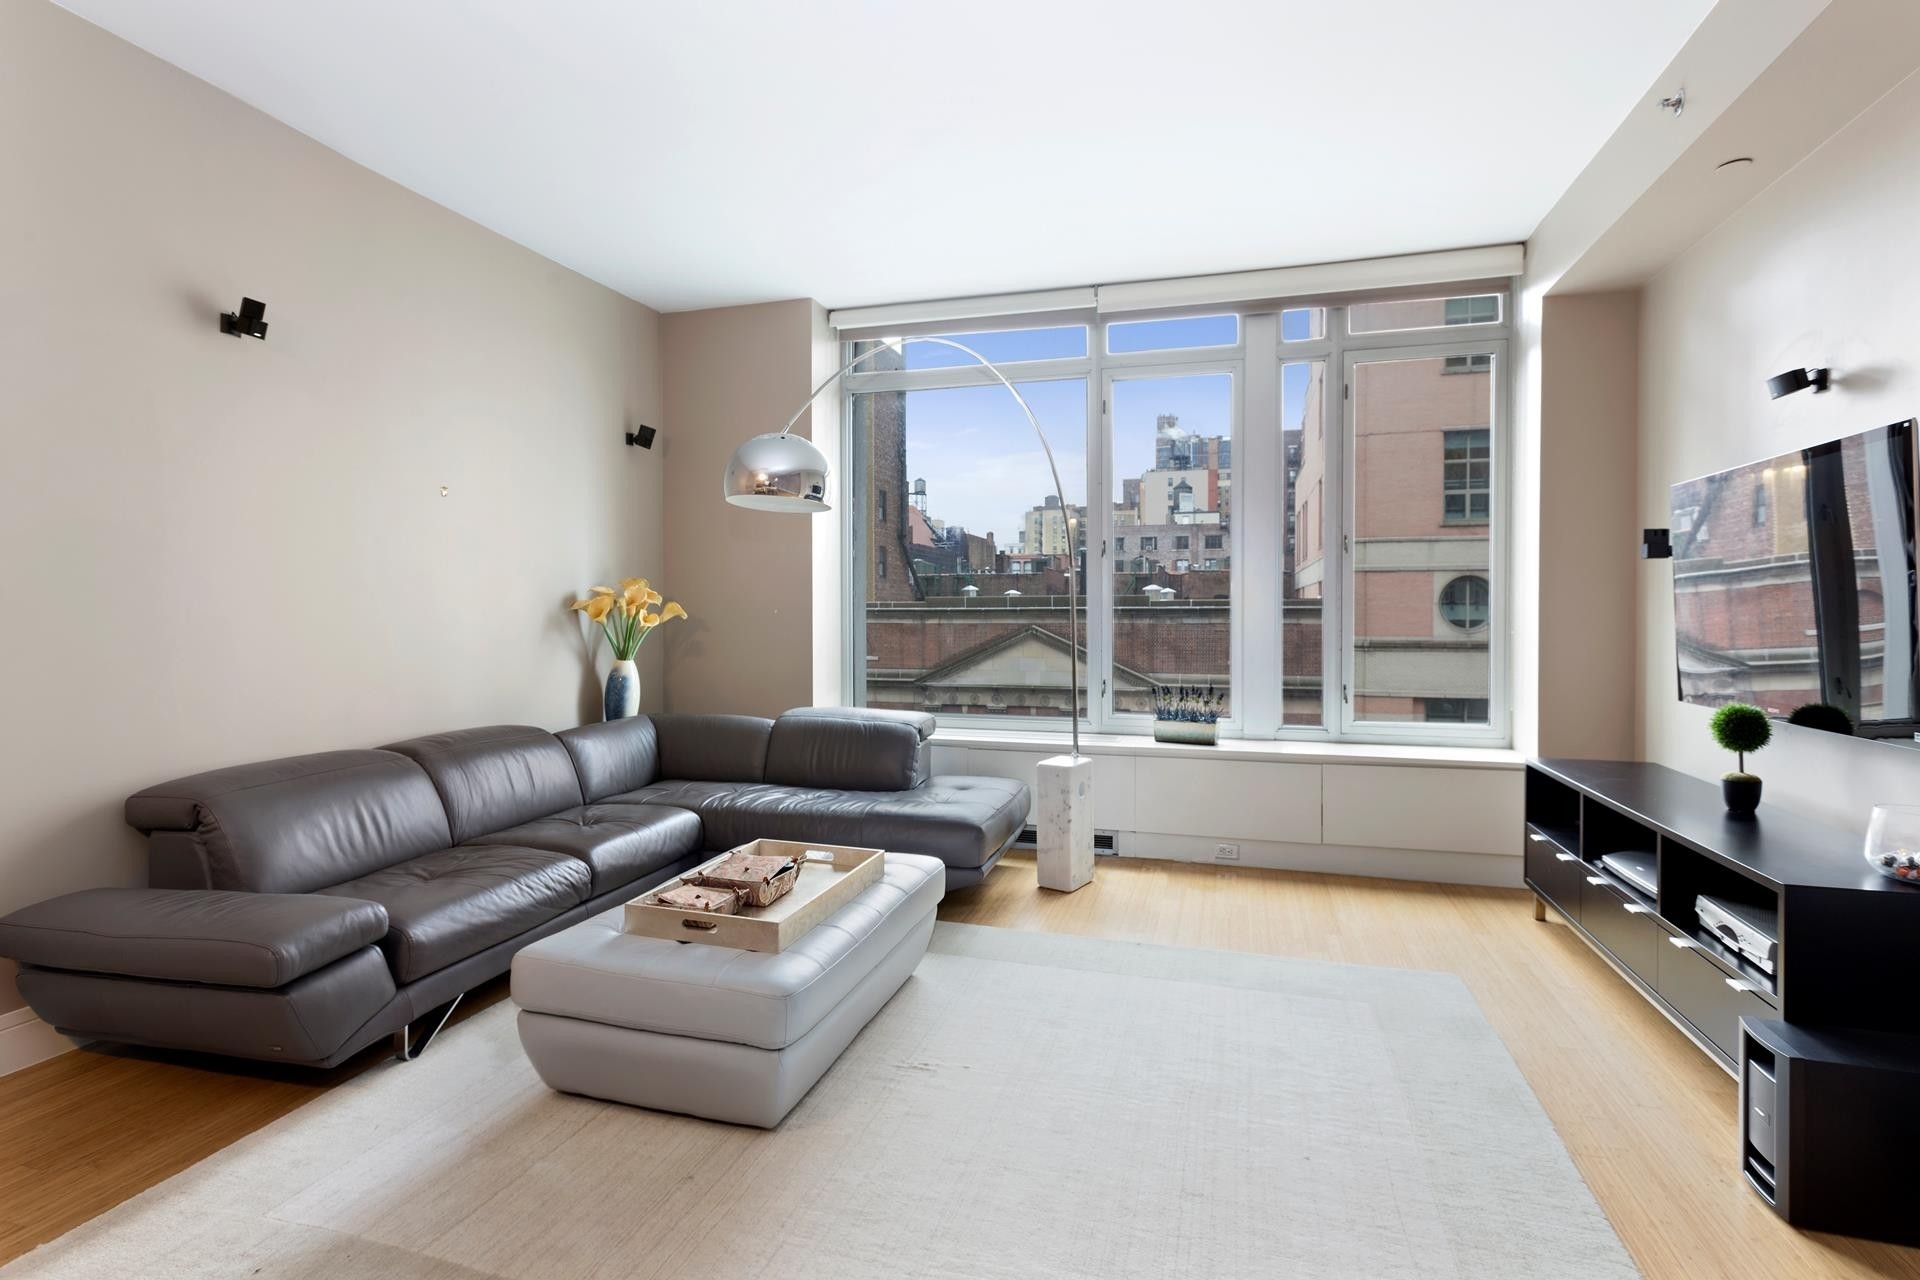 Property at 545 West 110th St, 5A New York